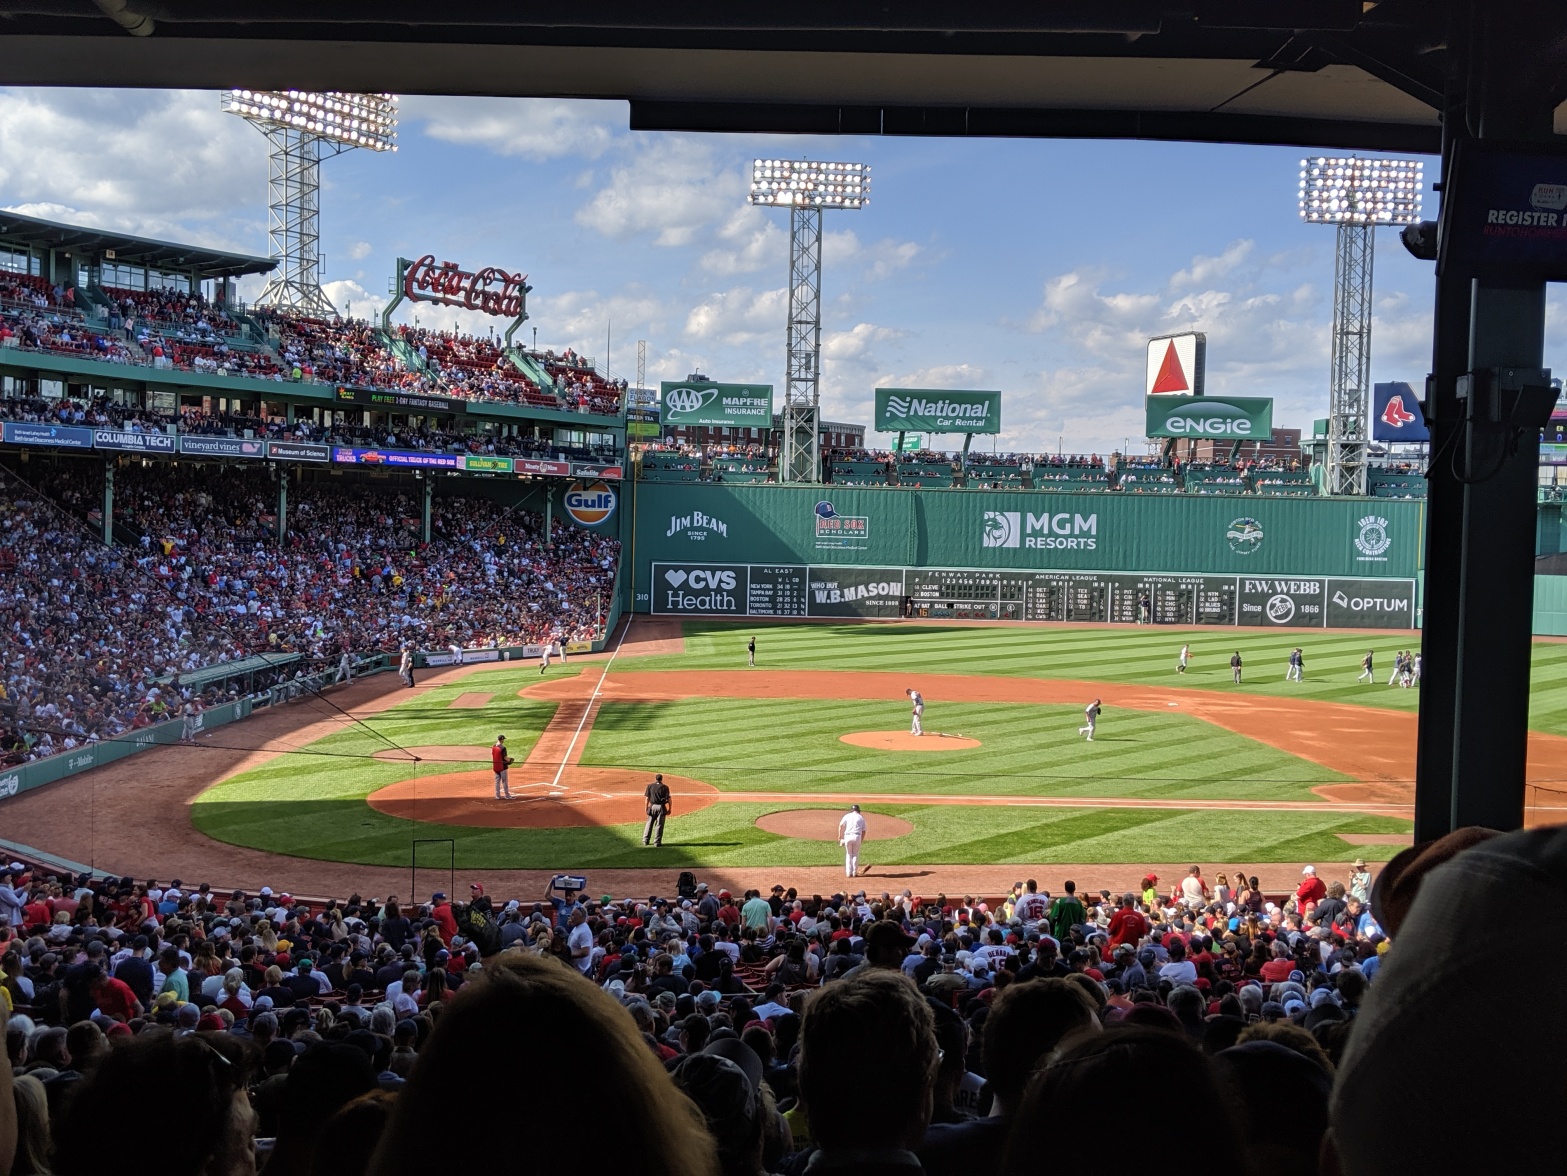 The View From Behind Home Plate - Fenway Park Greeting Card